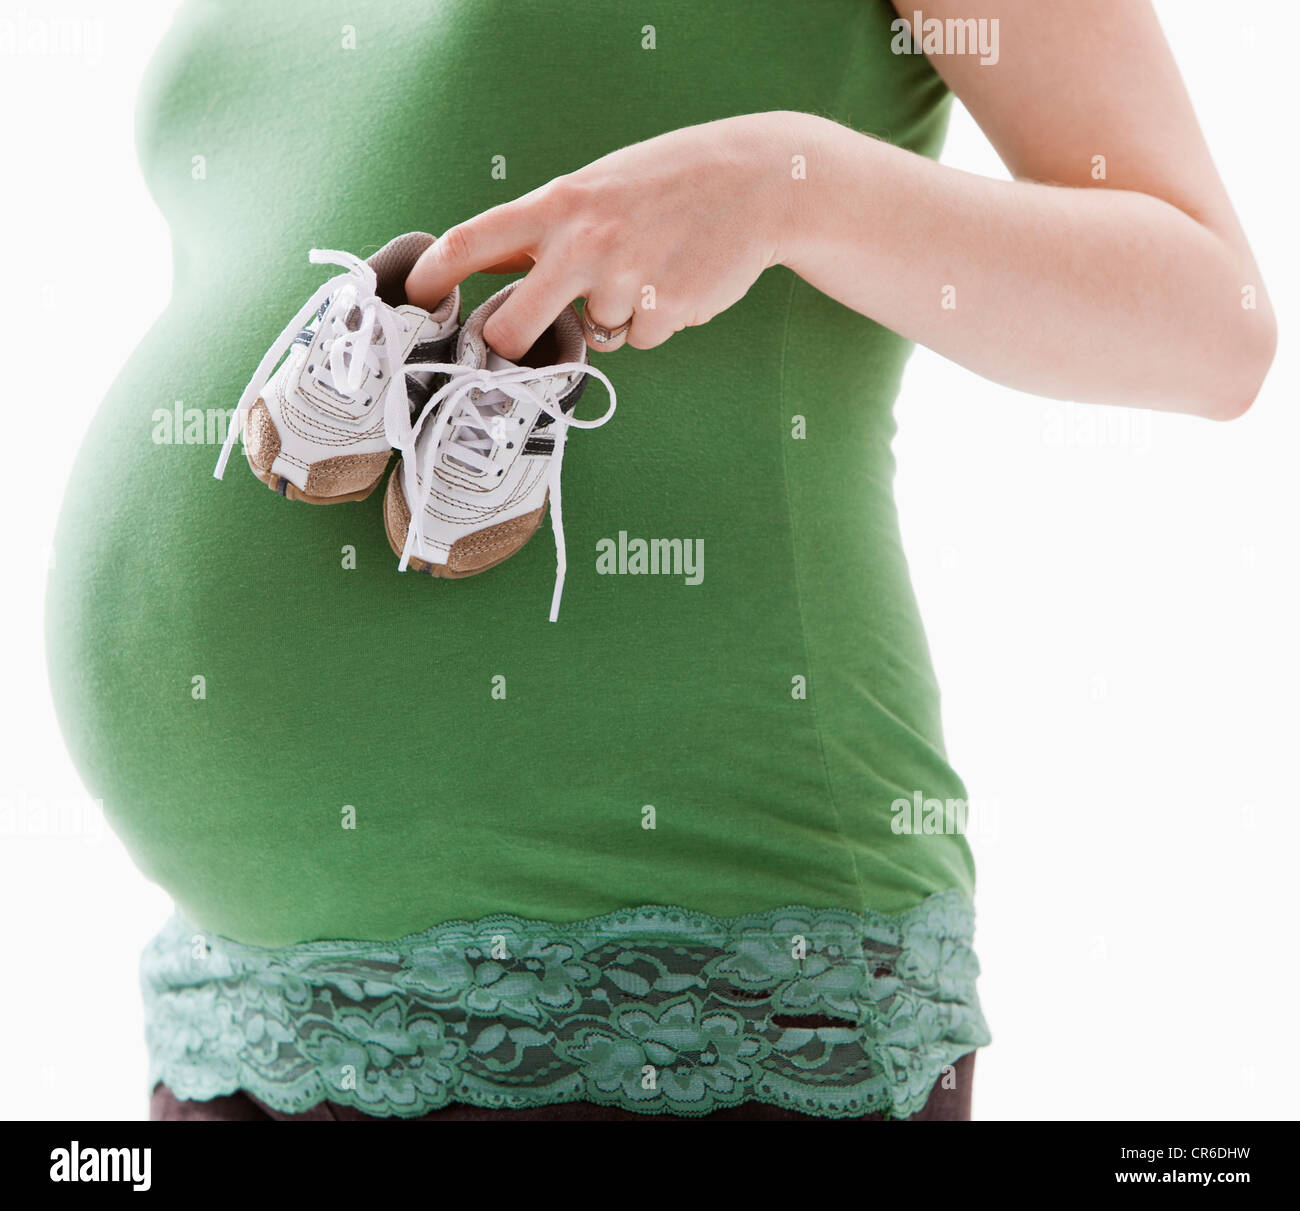 Studio Shot of mid section of pregnant woman holing baby booties Banque D'Images